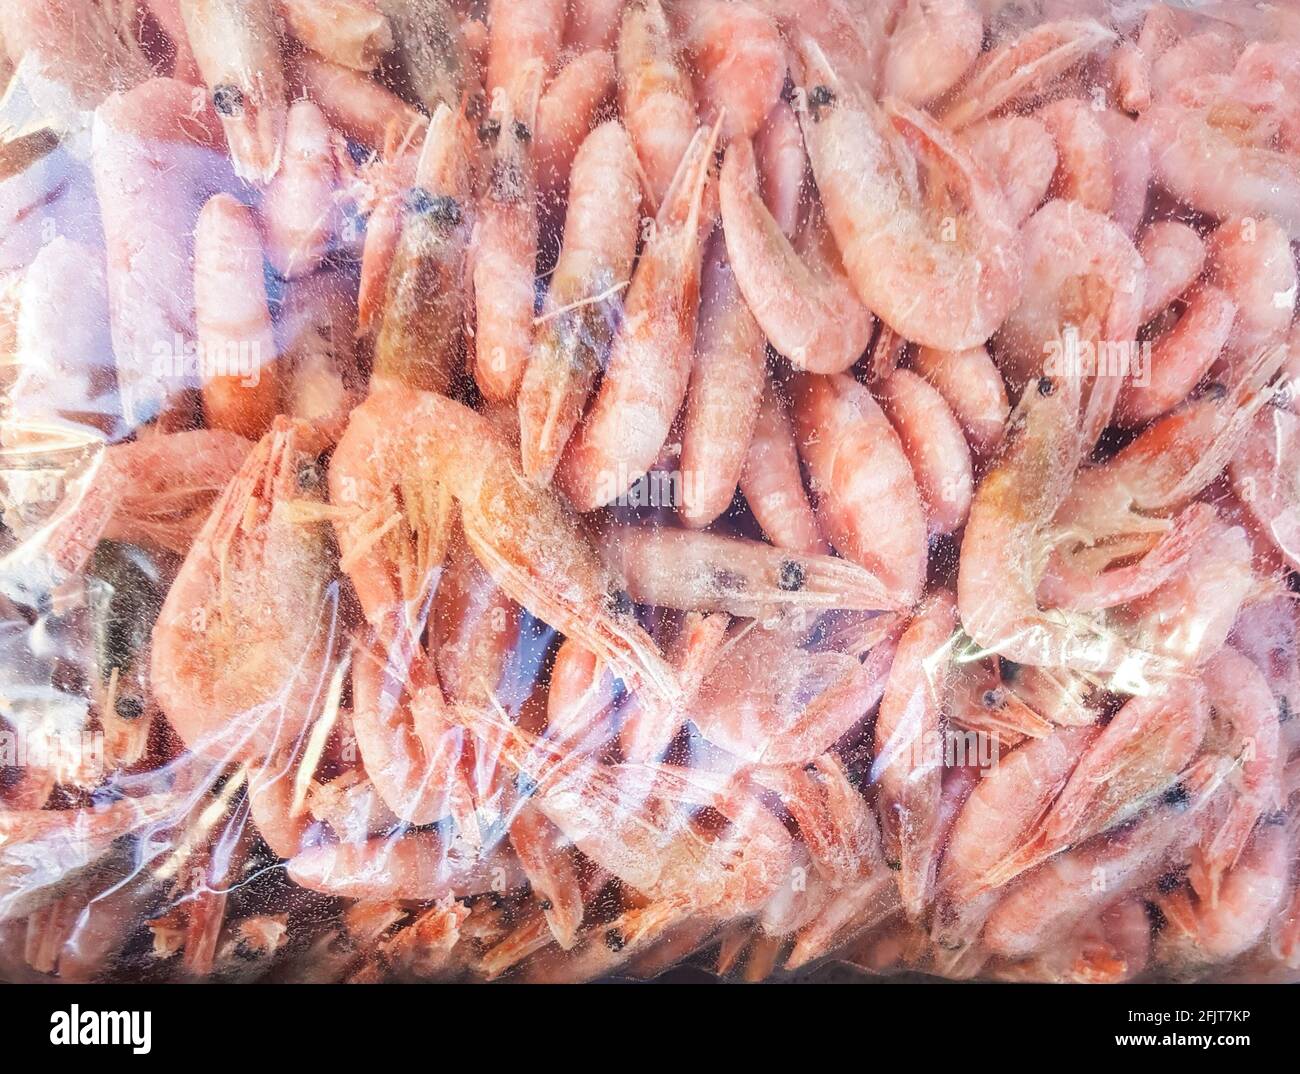 Boiled shrimp in plastic packaging, food background Stock Photo - Alamy